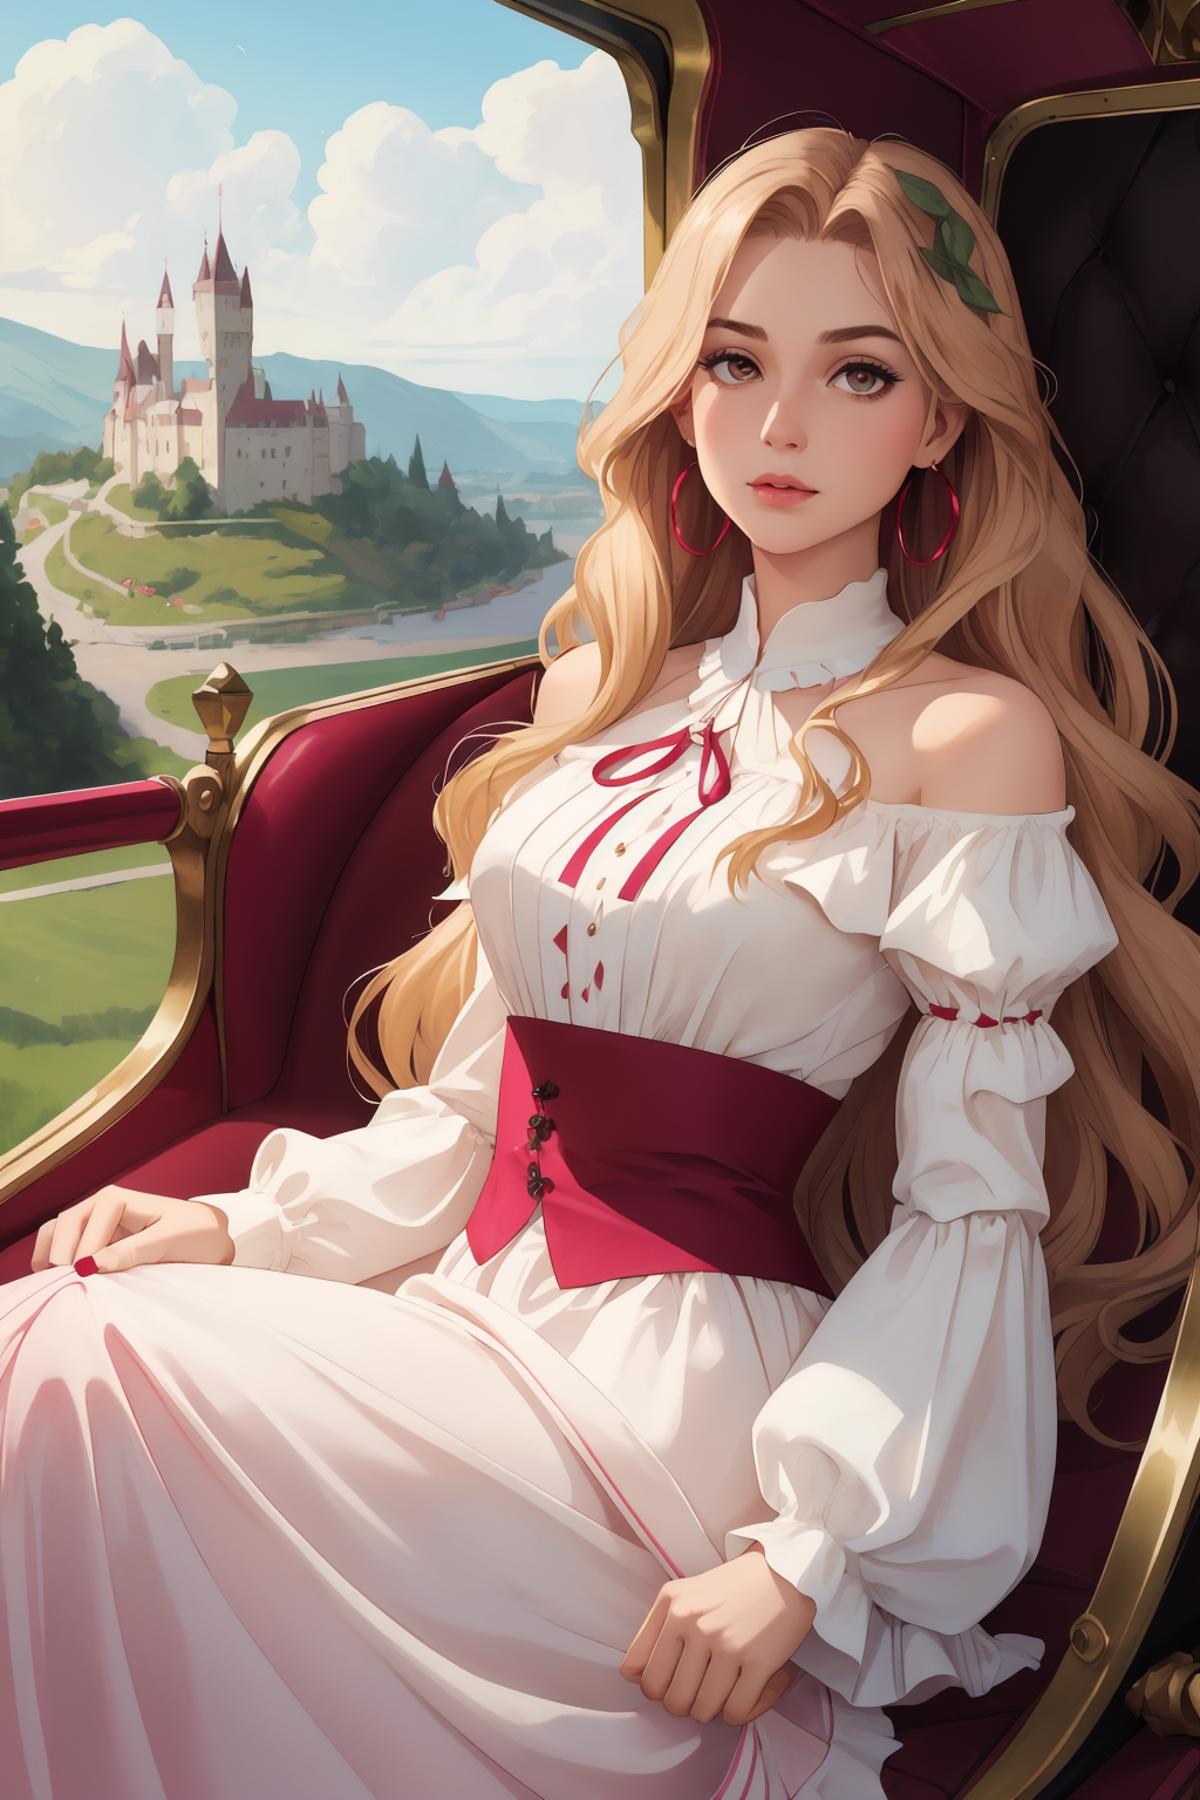 Majestic Maidens: Medieval Splendor - Awesome prompt lists image by Automaticism